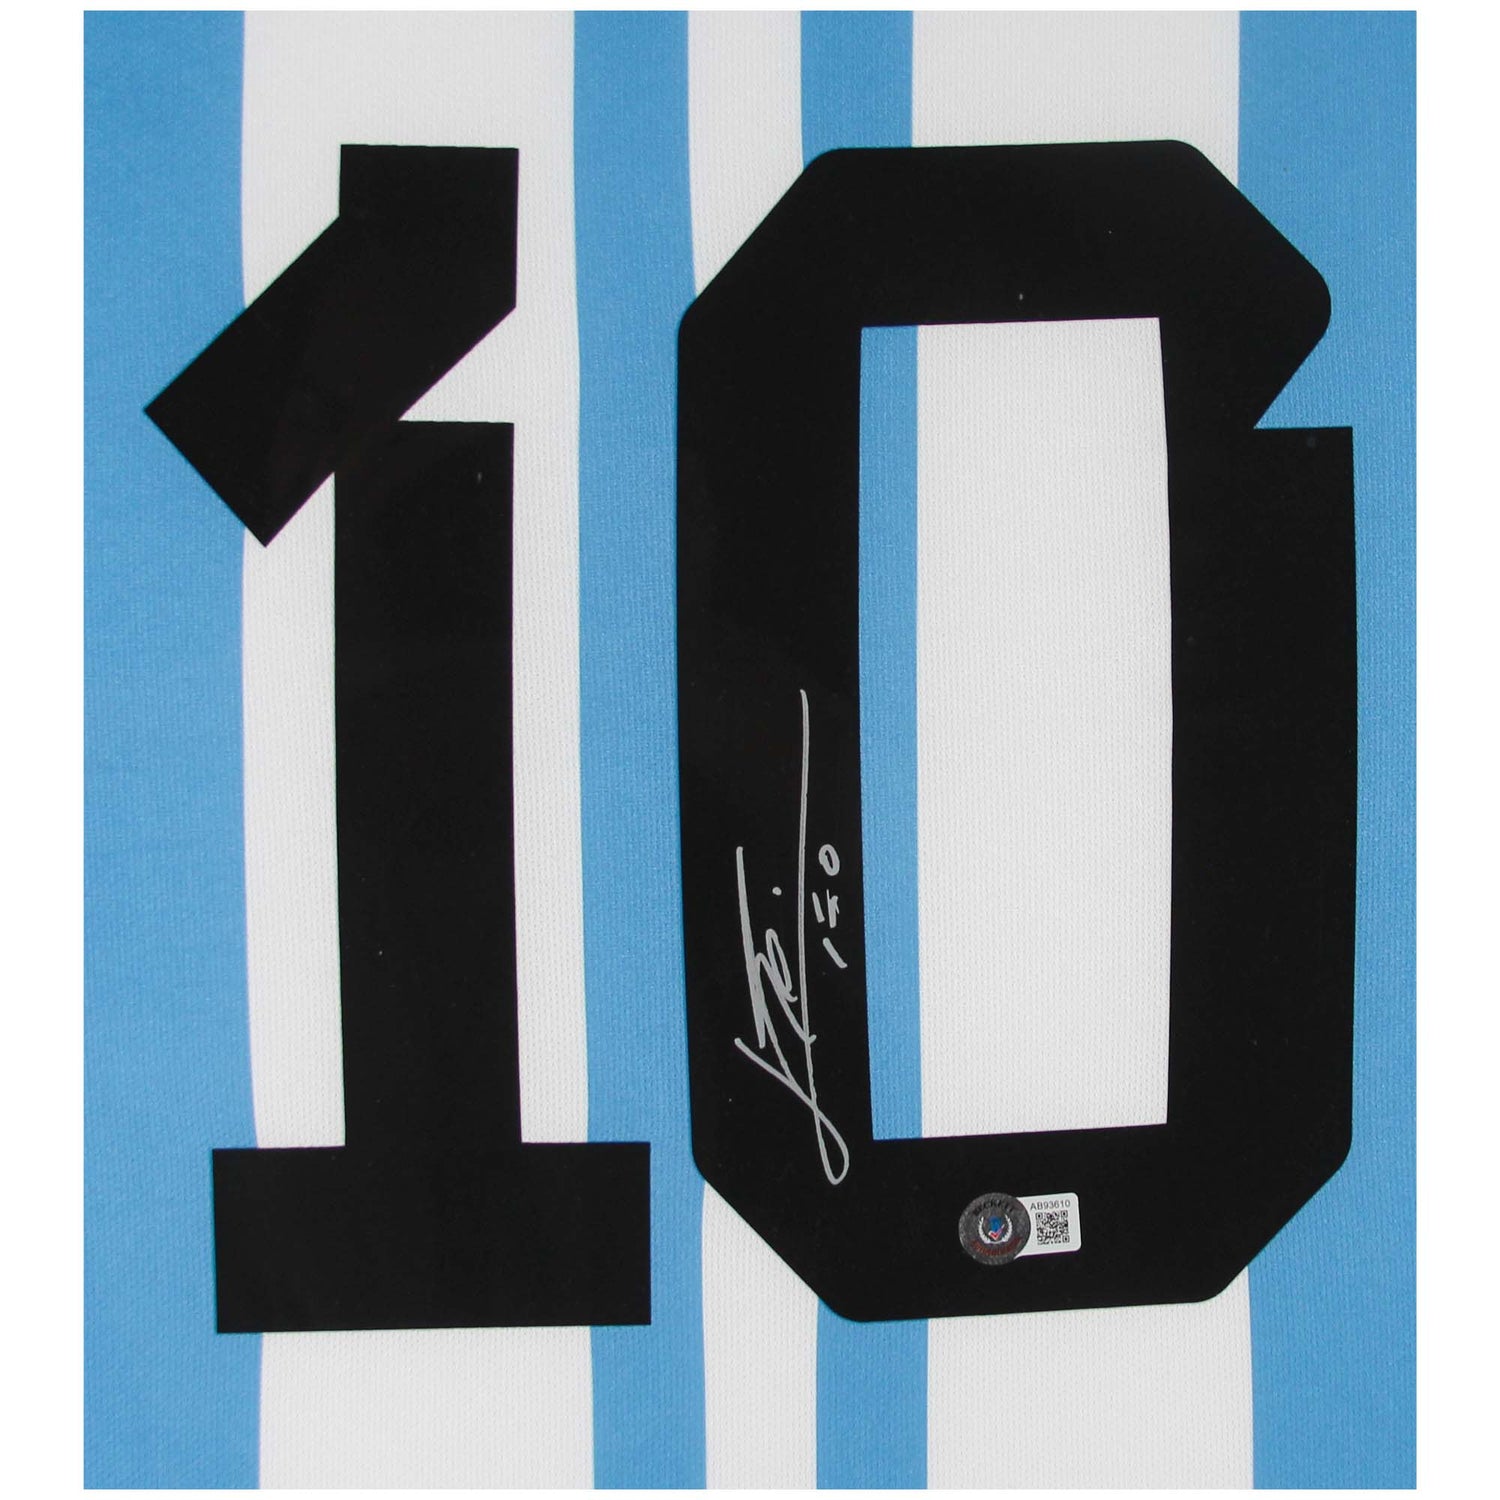 Lionel Messi Argentina Signed Jersey World Cup 2022 - Tagotee